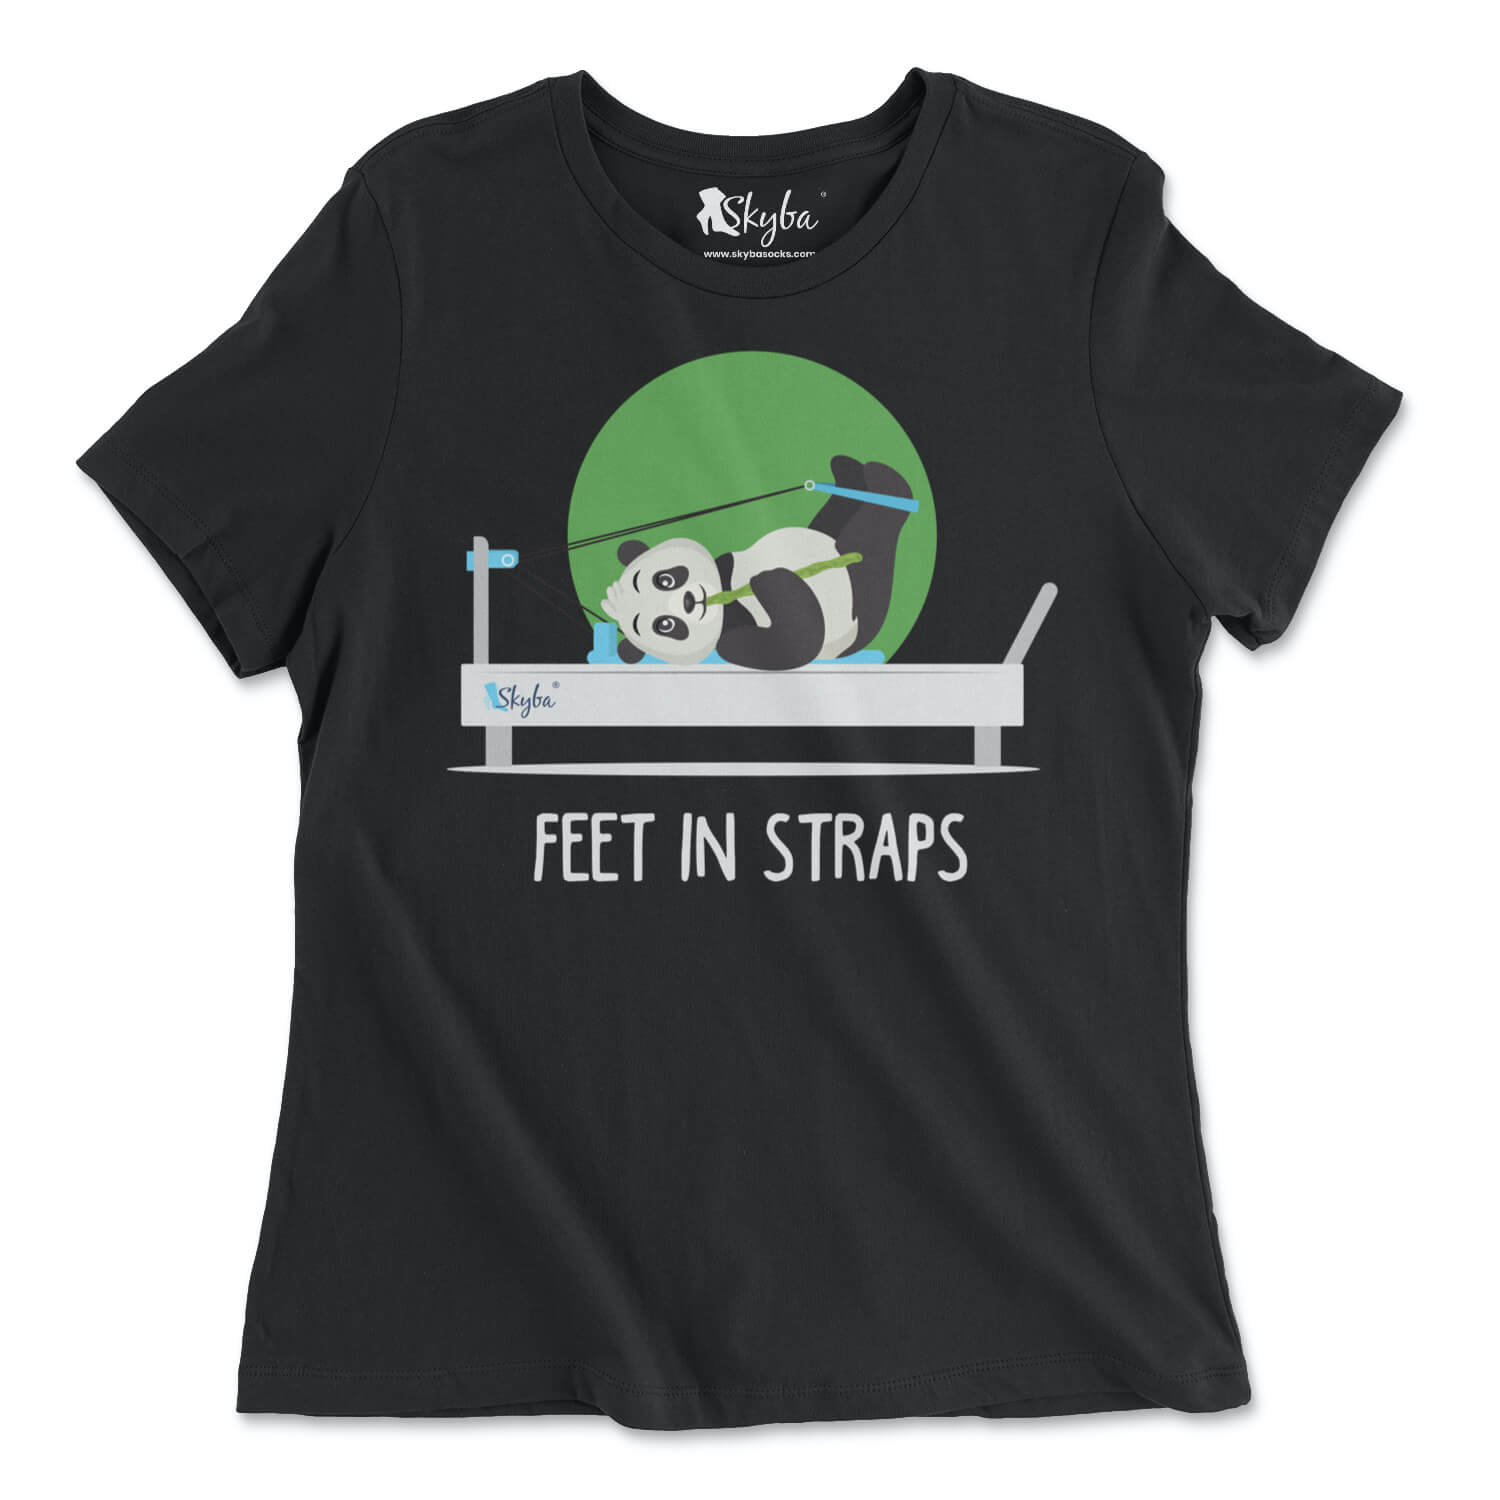 "Feet in Straps" Panda on Reformer - Classic Tee Skyba T-Shirt